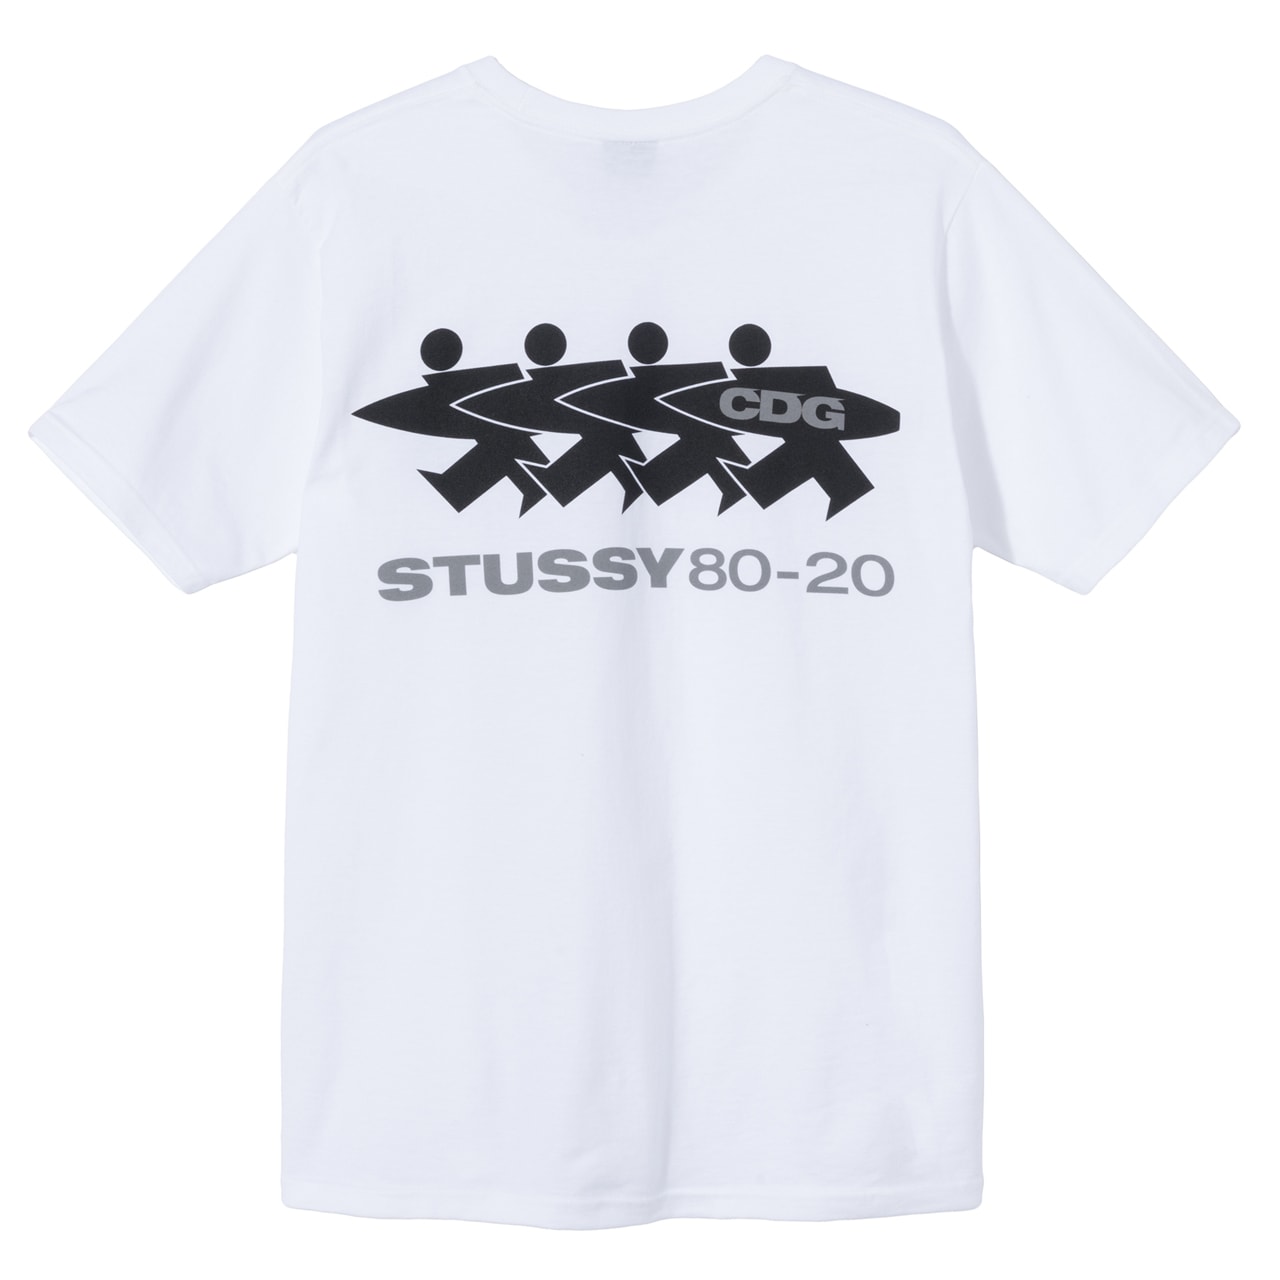 CDG COMME des GARÇONS x Stüssy 40th Anniversary collaboration collection release date info buy november 13 2020 dover street market